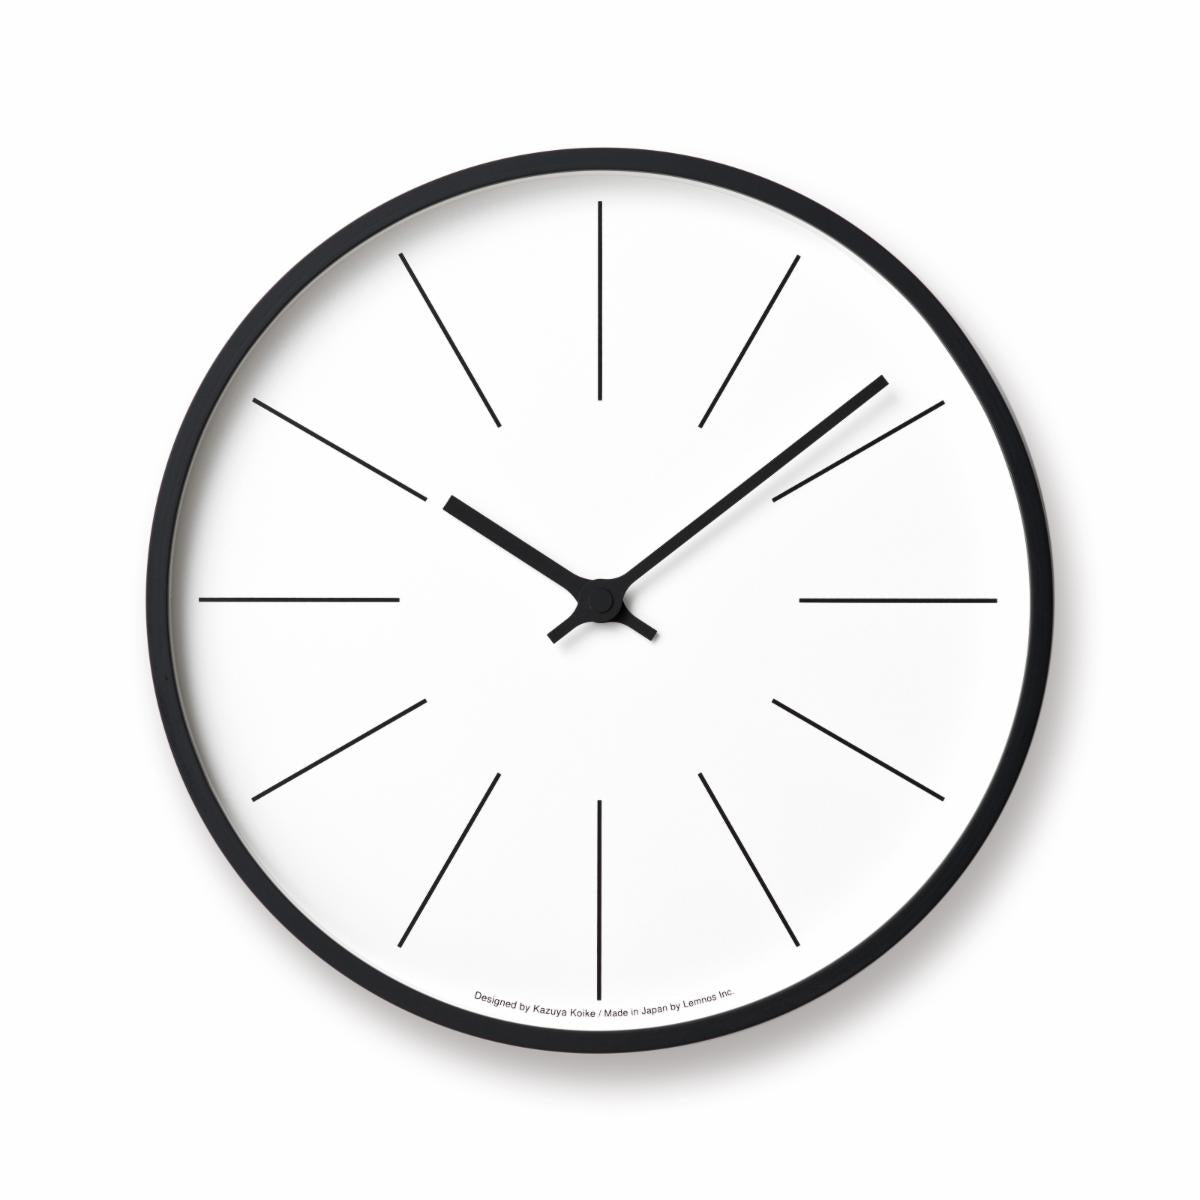 Tower L - Line Clock by Lemnos